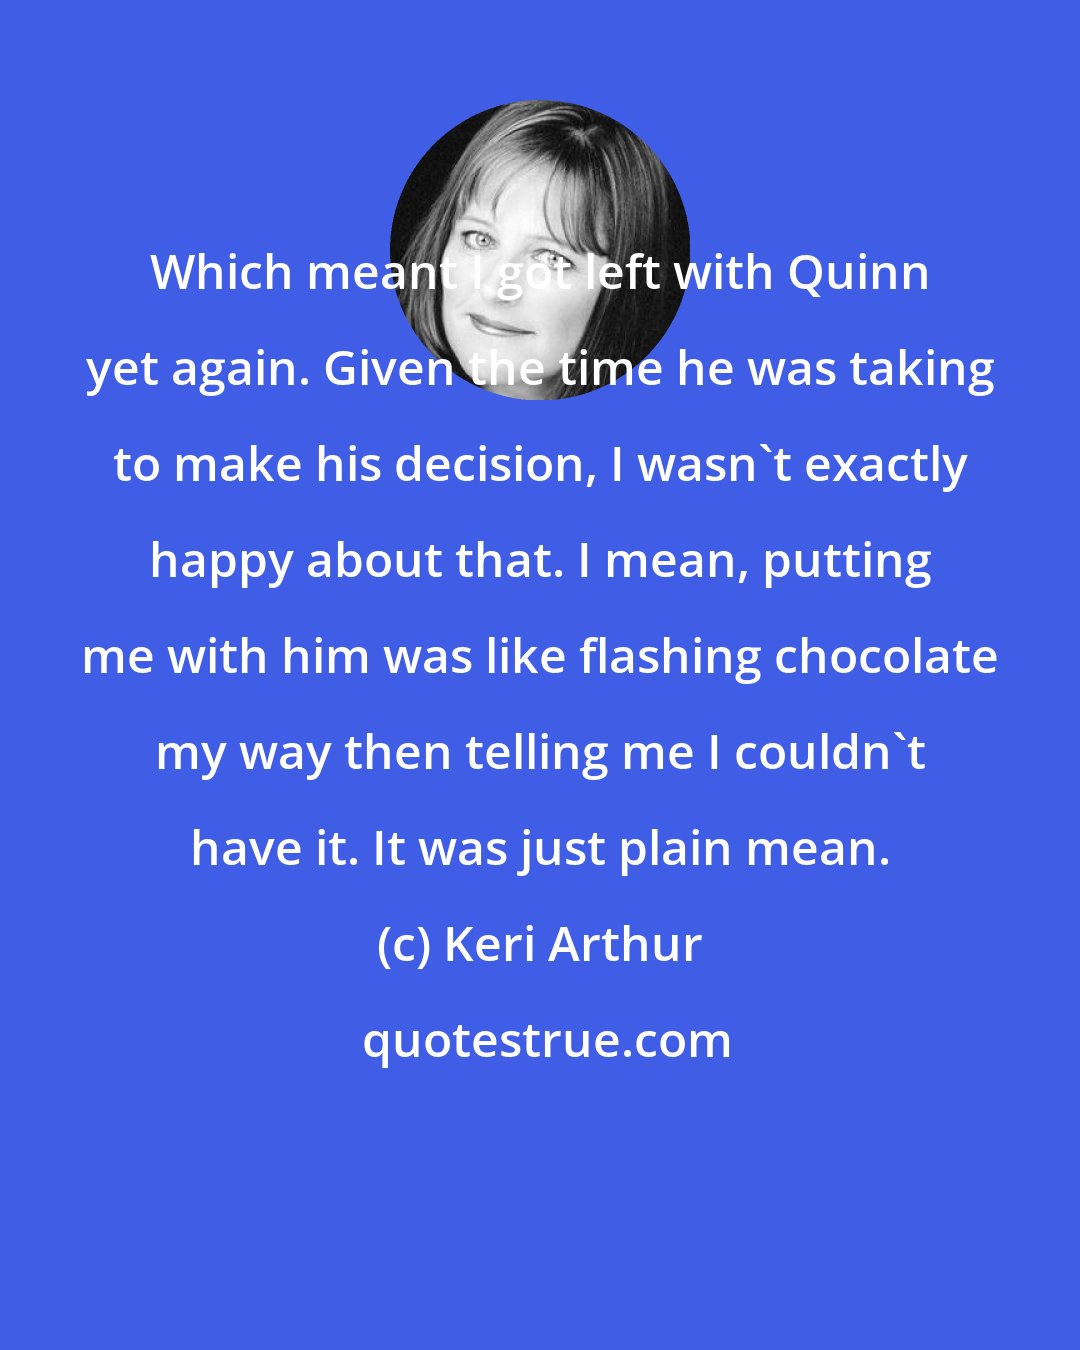 Keri Arthur: Which meant I got left with Quinn yet again. Given the time he was taking to make his decision, I wasn't exactly happy about that. I mean, putting me with him was like flashing chocolate my way then telling me I couldn't have it. It was just plain mean.